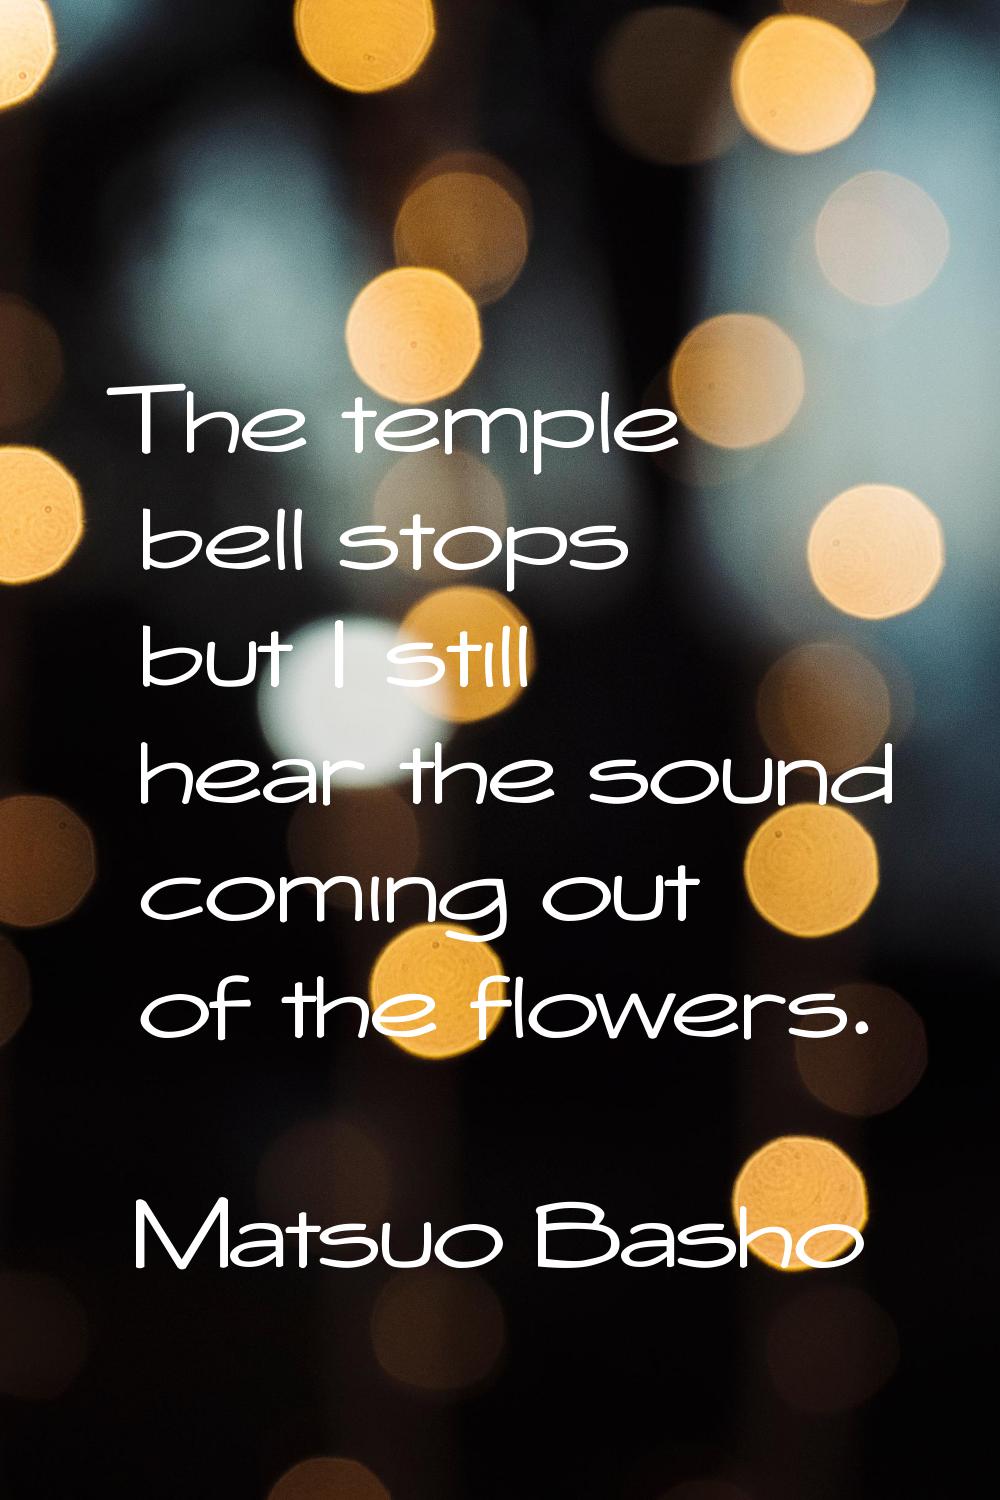 The temple bell stops but I still hear the sound coming out of the flowers.